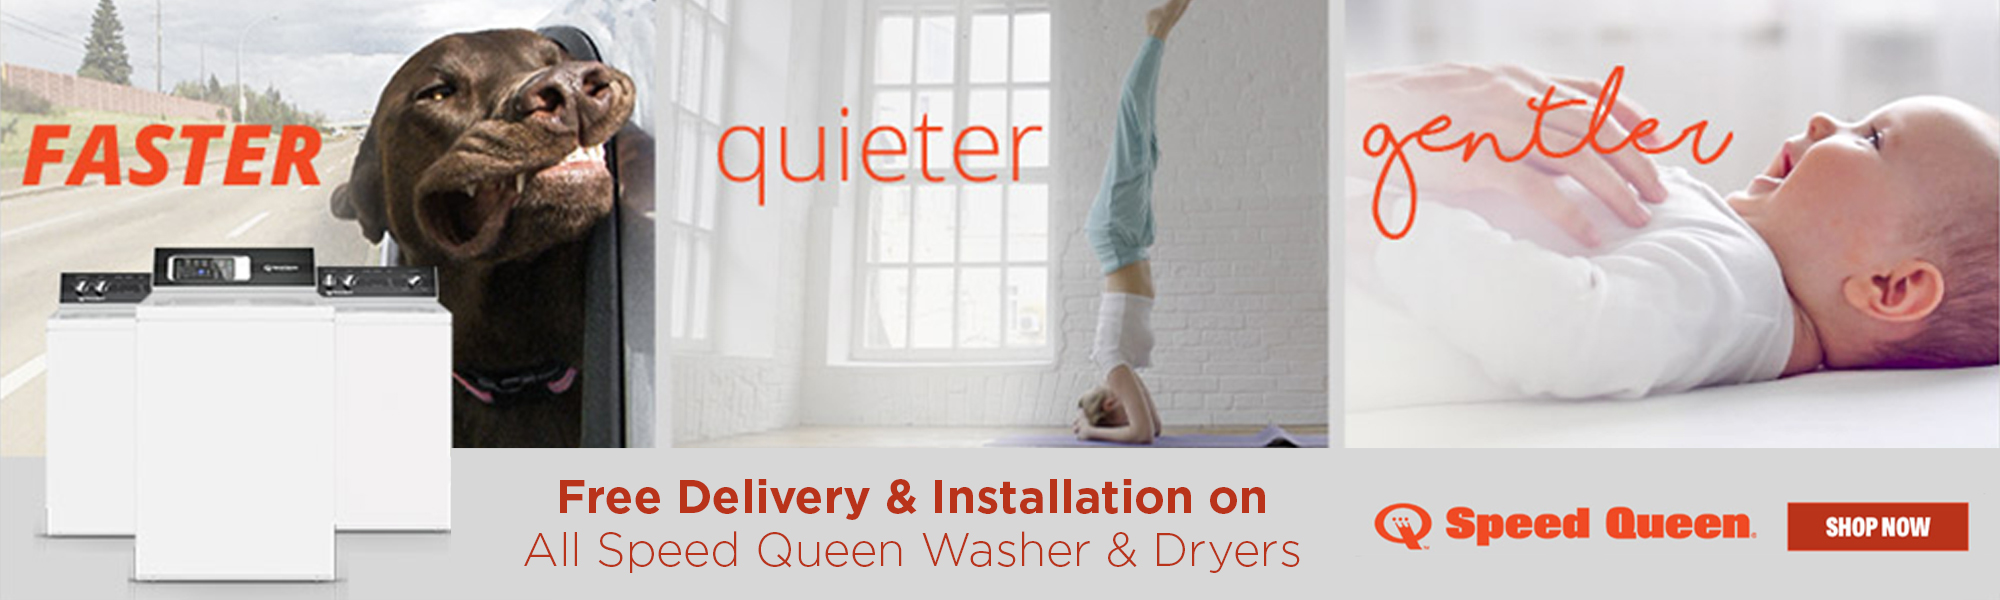 Speed Queen - Free Delivery + Installation